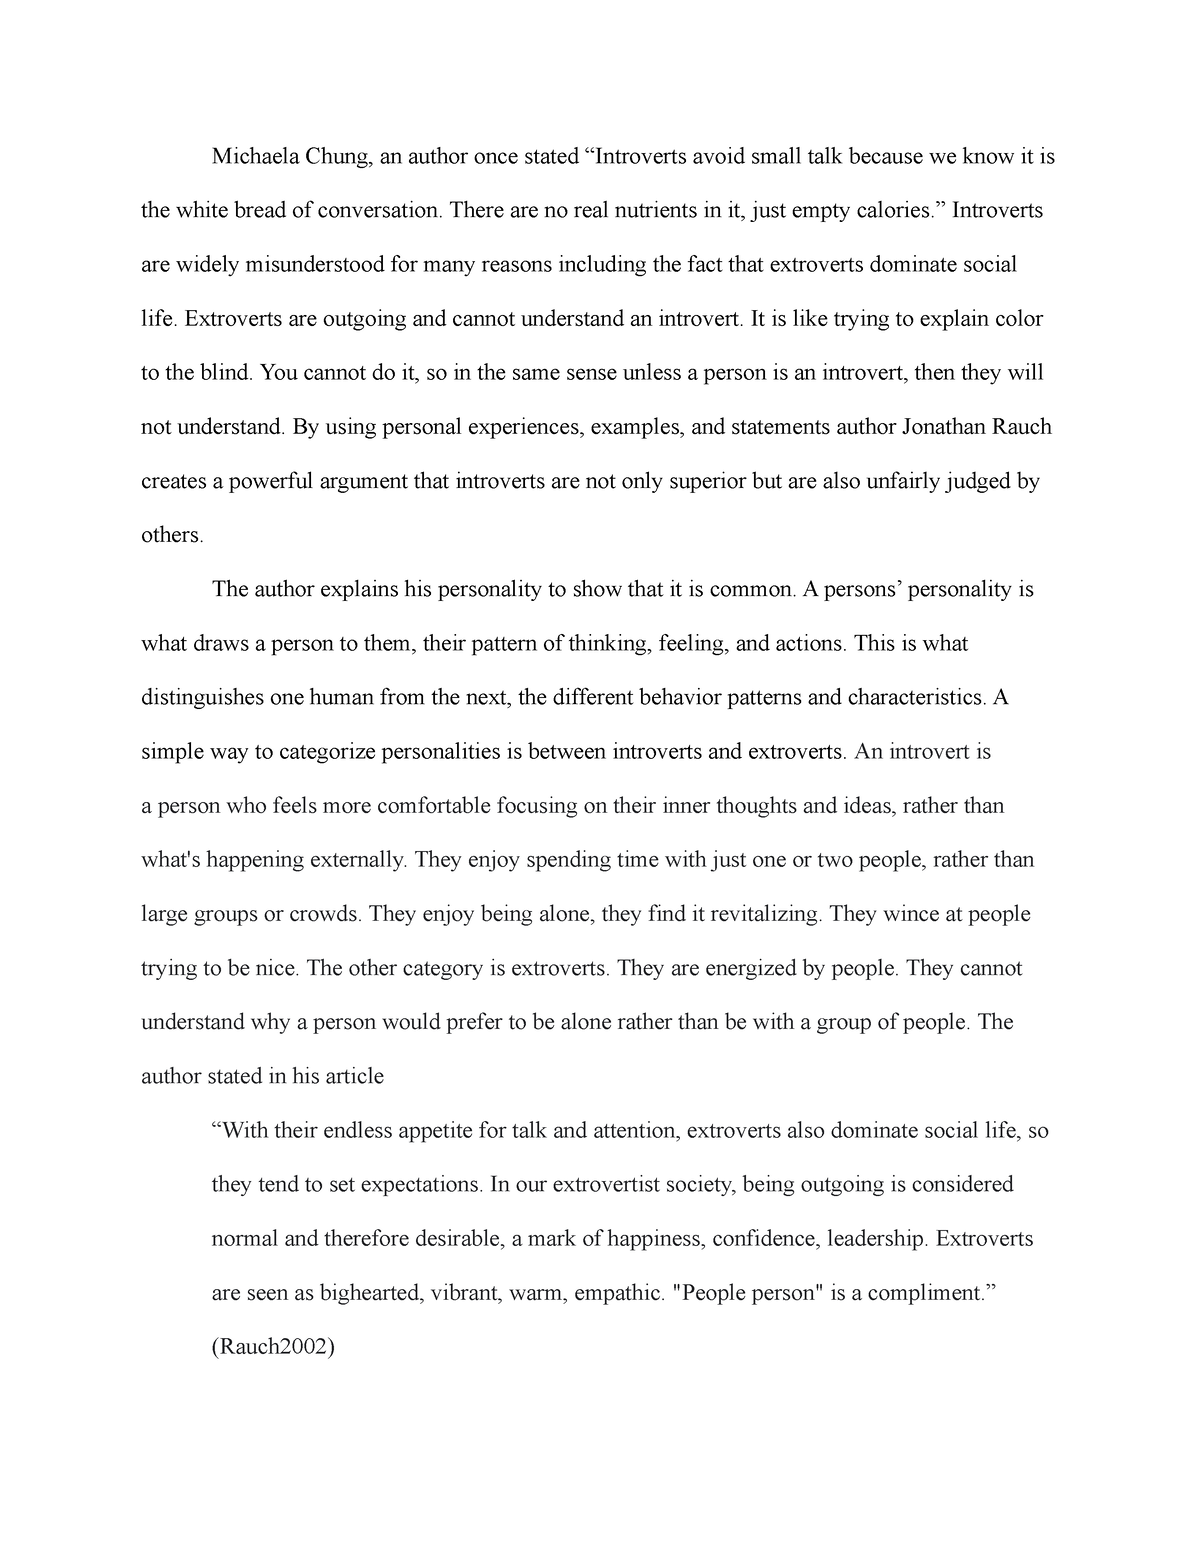 5 2 first draft of critical analysis essay